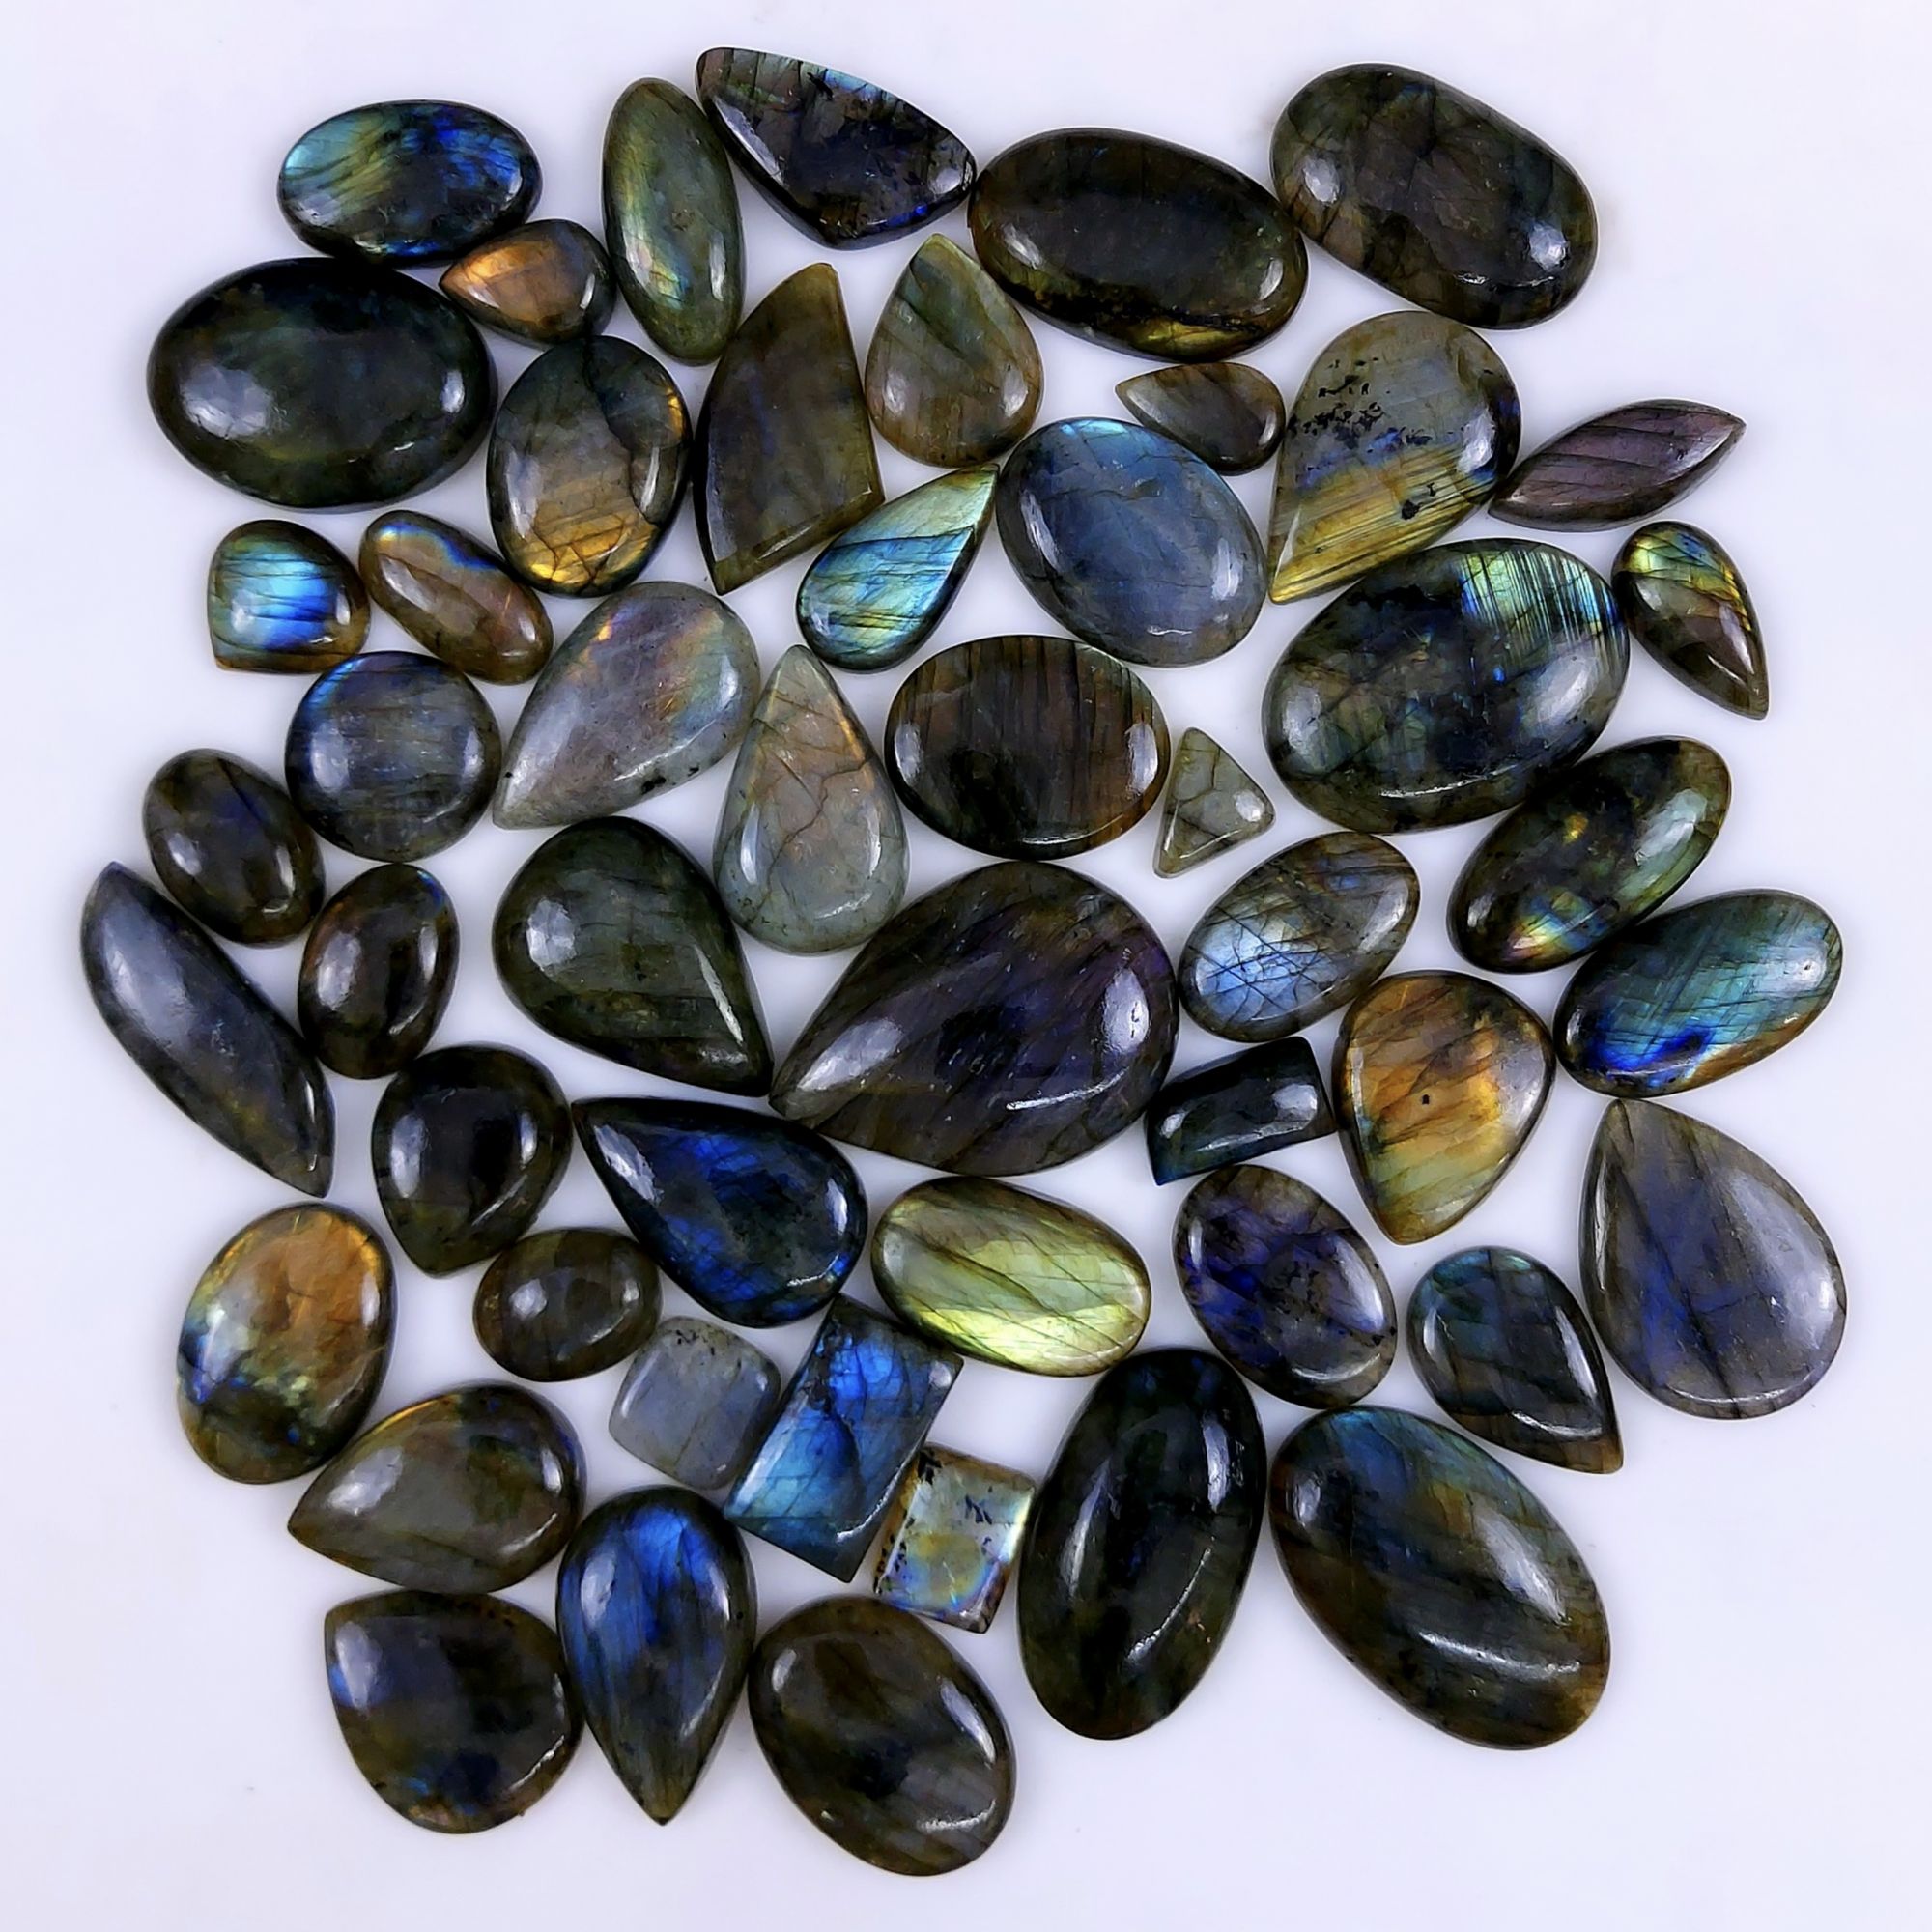 51pc 1631Cts Labradorite Cabochon Multifire Healing Crystal For Jewelry Supplies, Labradorite Necklace Handmade Wire Wrapped Gemstone Pendant 45x32 14x14mm#6281